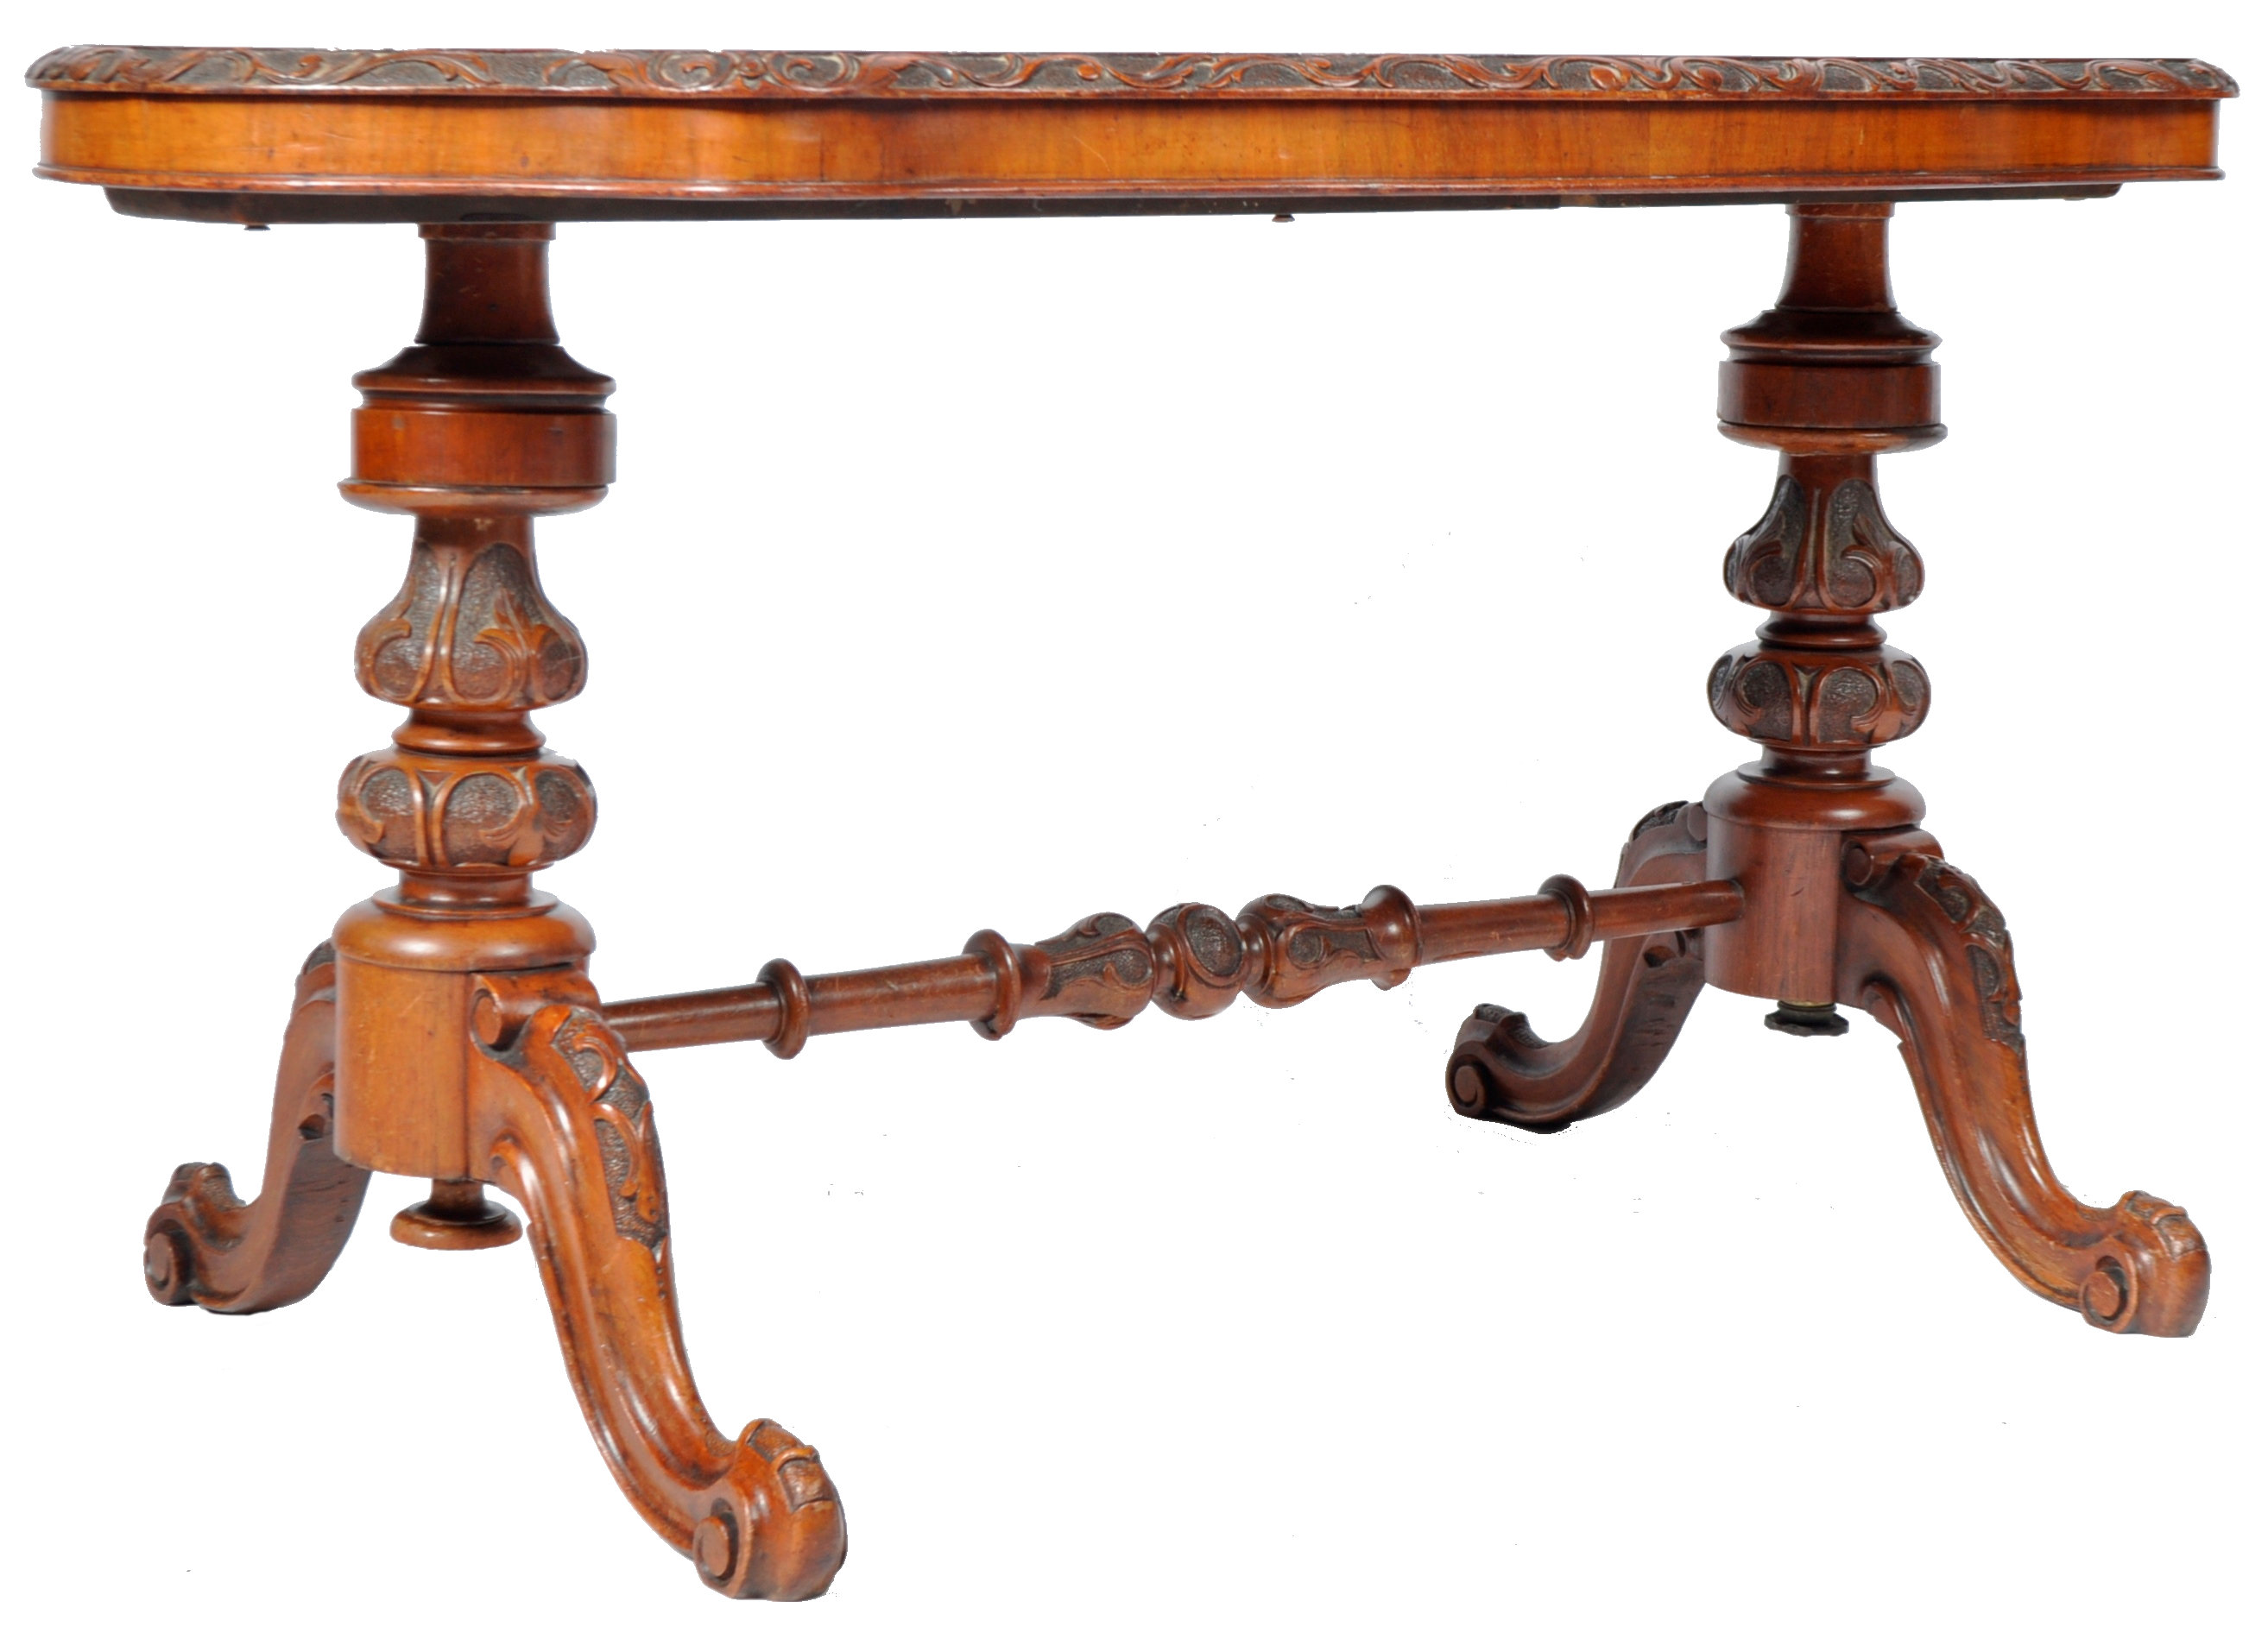 19TH CENTURY VICTORIAN ENGLISH WALNUT AND MARQUETRY TABLE